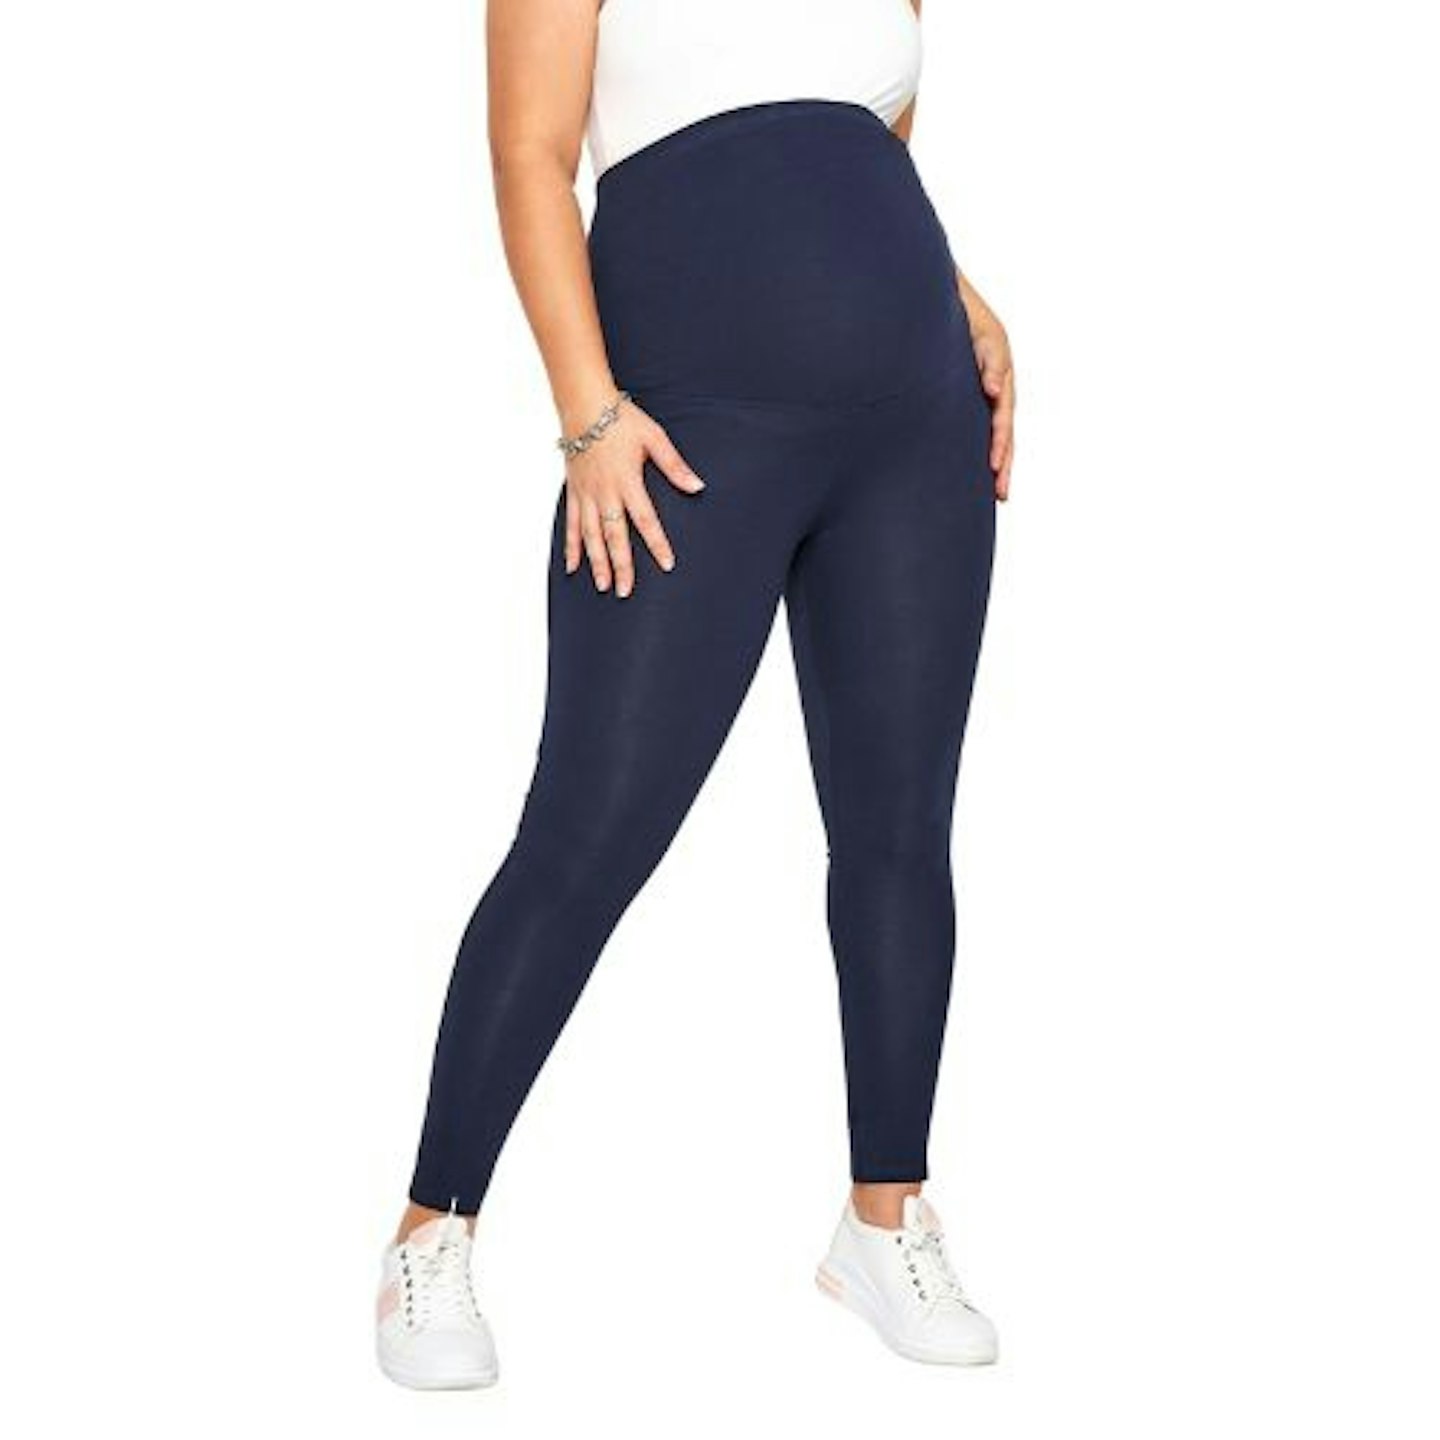 Yours Maternity Jeggings With Comfort Panel- plus size maternity clothes